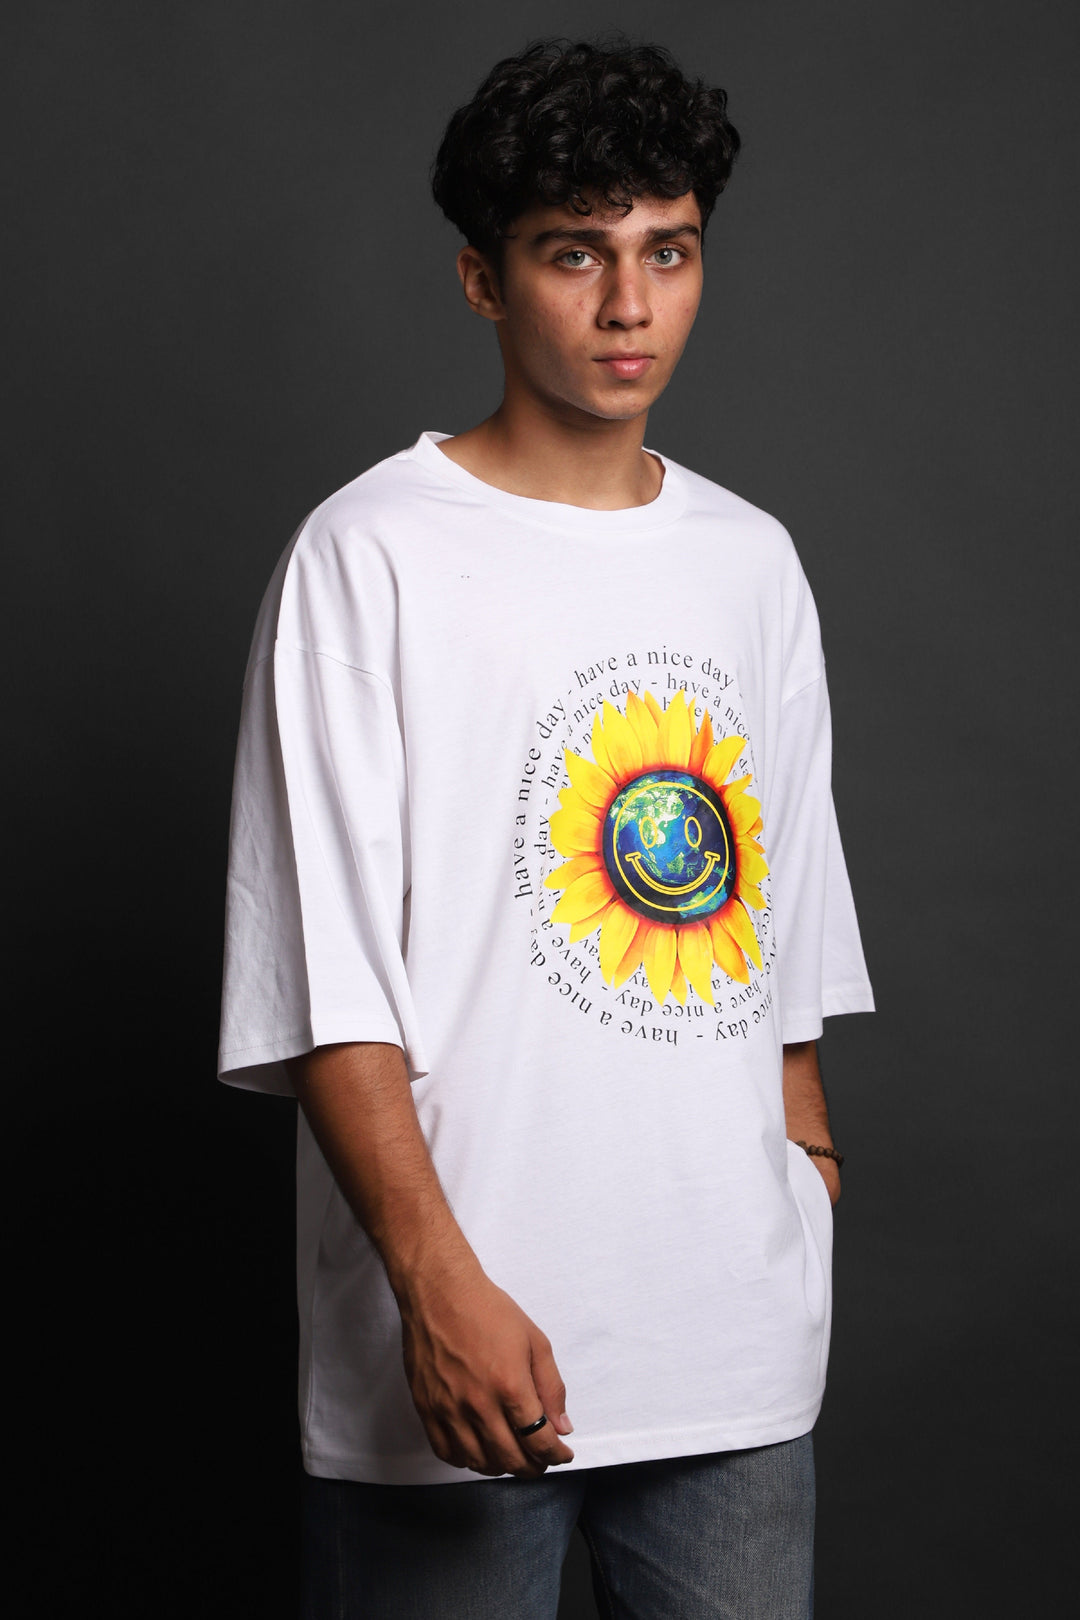 Printed Oversized Tee - SMILEY MEN'S PRINTED OVER SIZE TEE#1